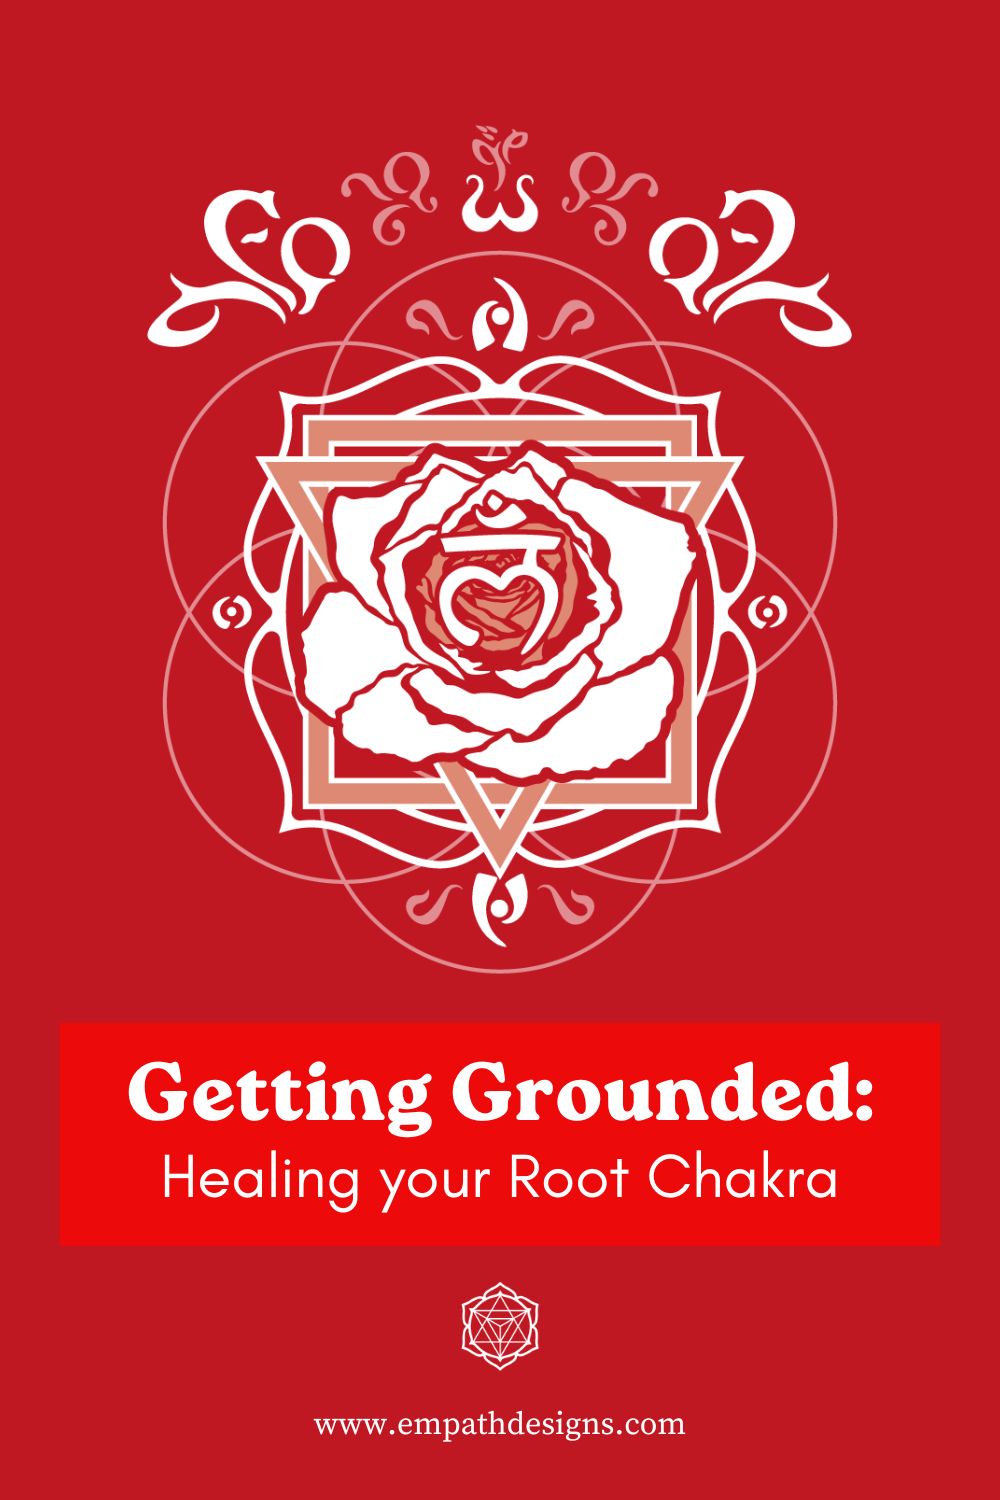 Getting Grounded: Healing Your Root Chakra